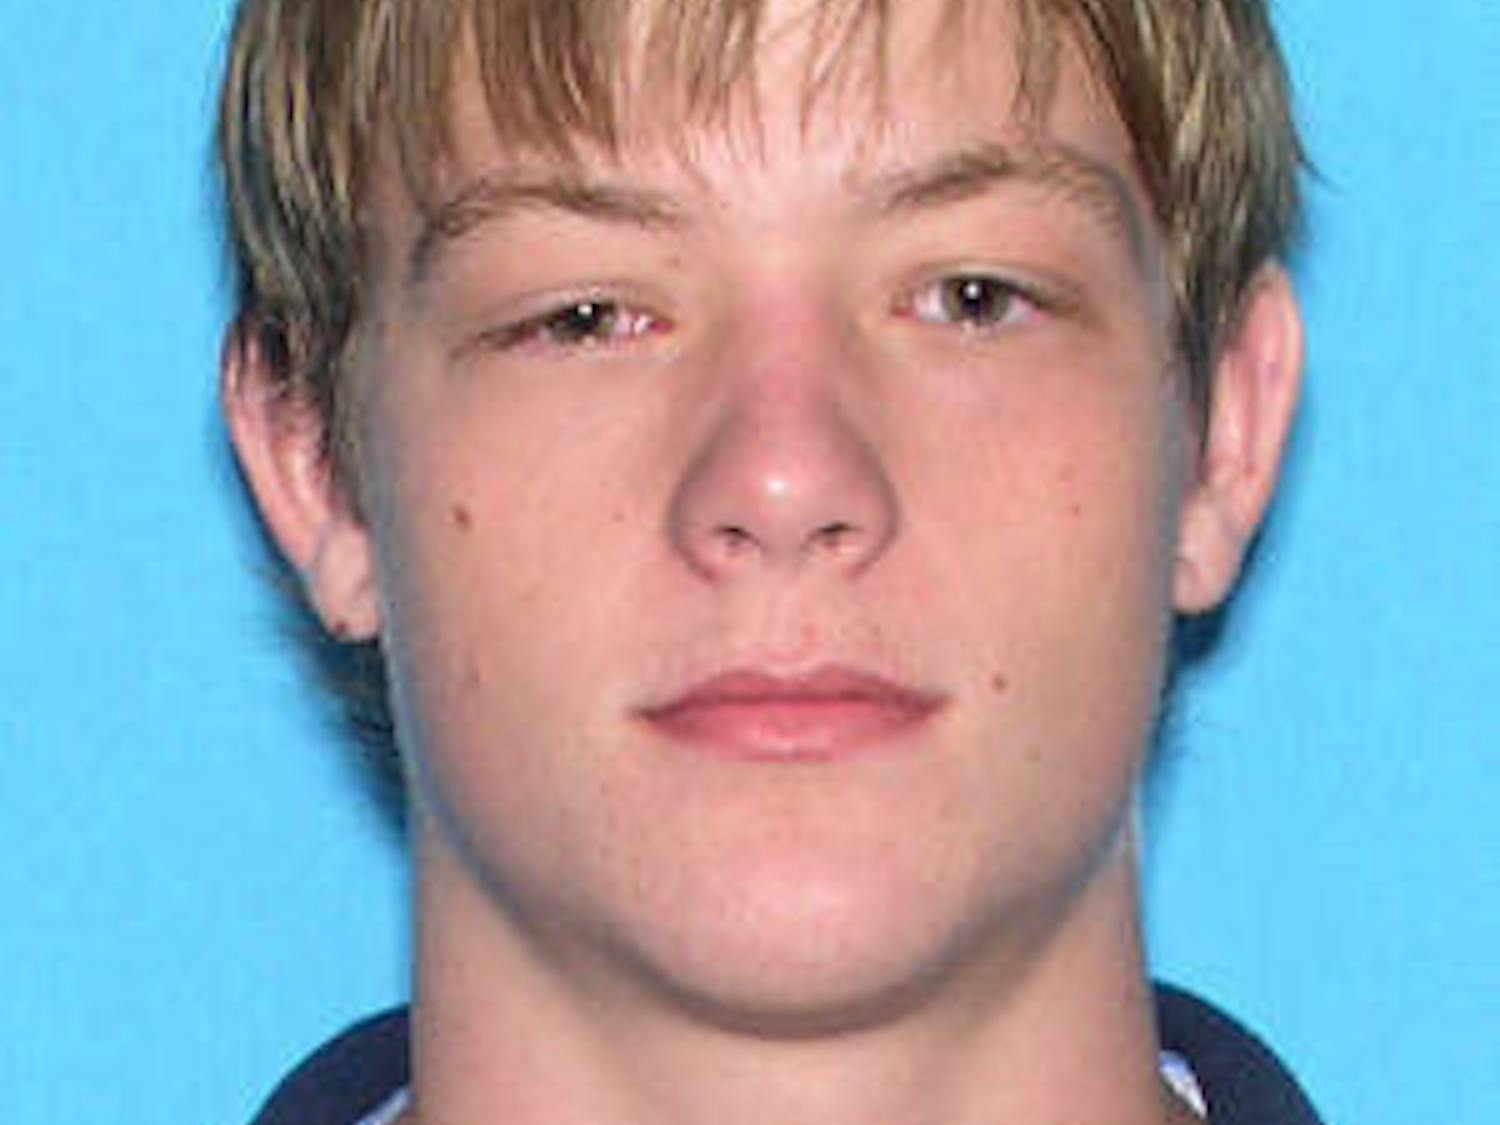 Michael Crace, 20, was killed around 11:40 p.m. Monday night by his roommate Jude Rizzo, 21.